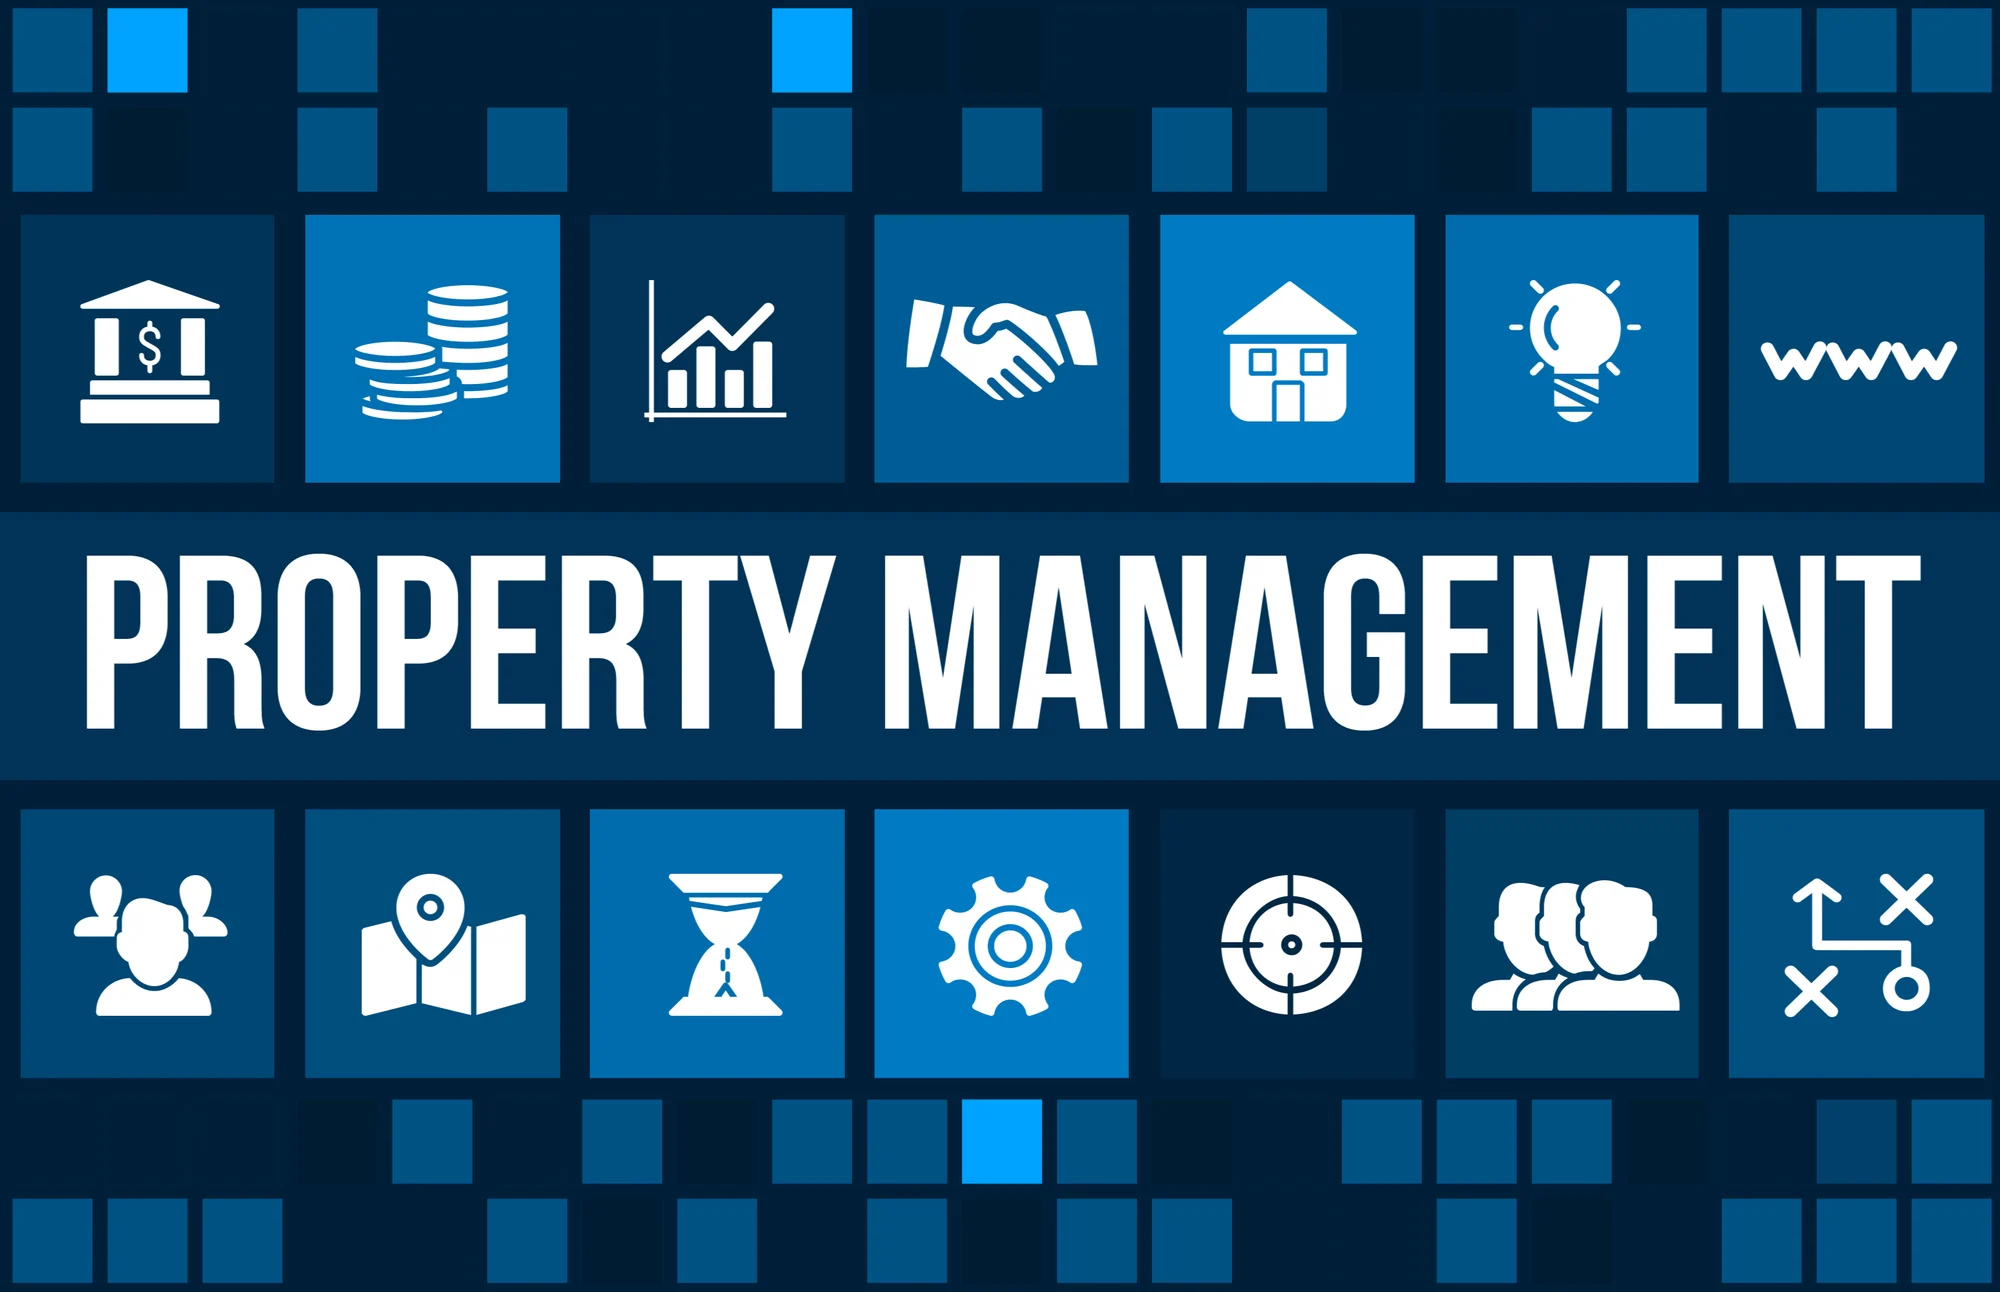 Property Management concept image with business icons and copyspace